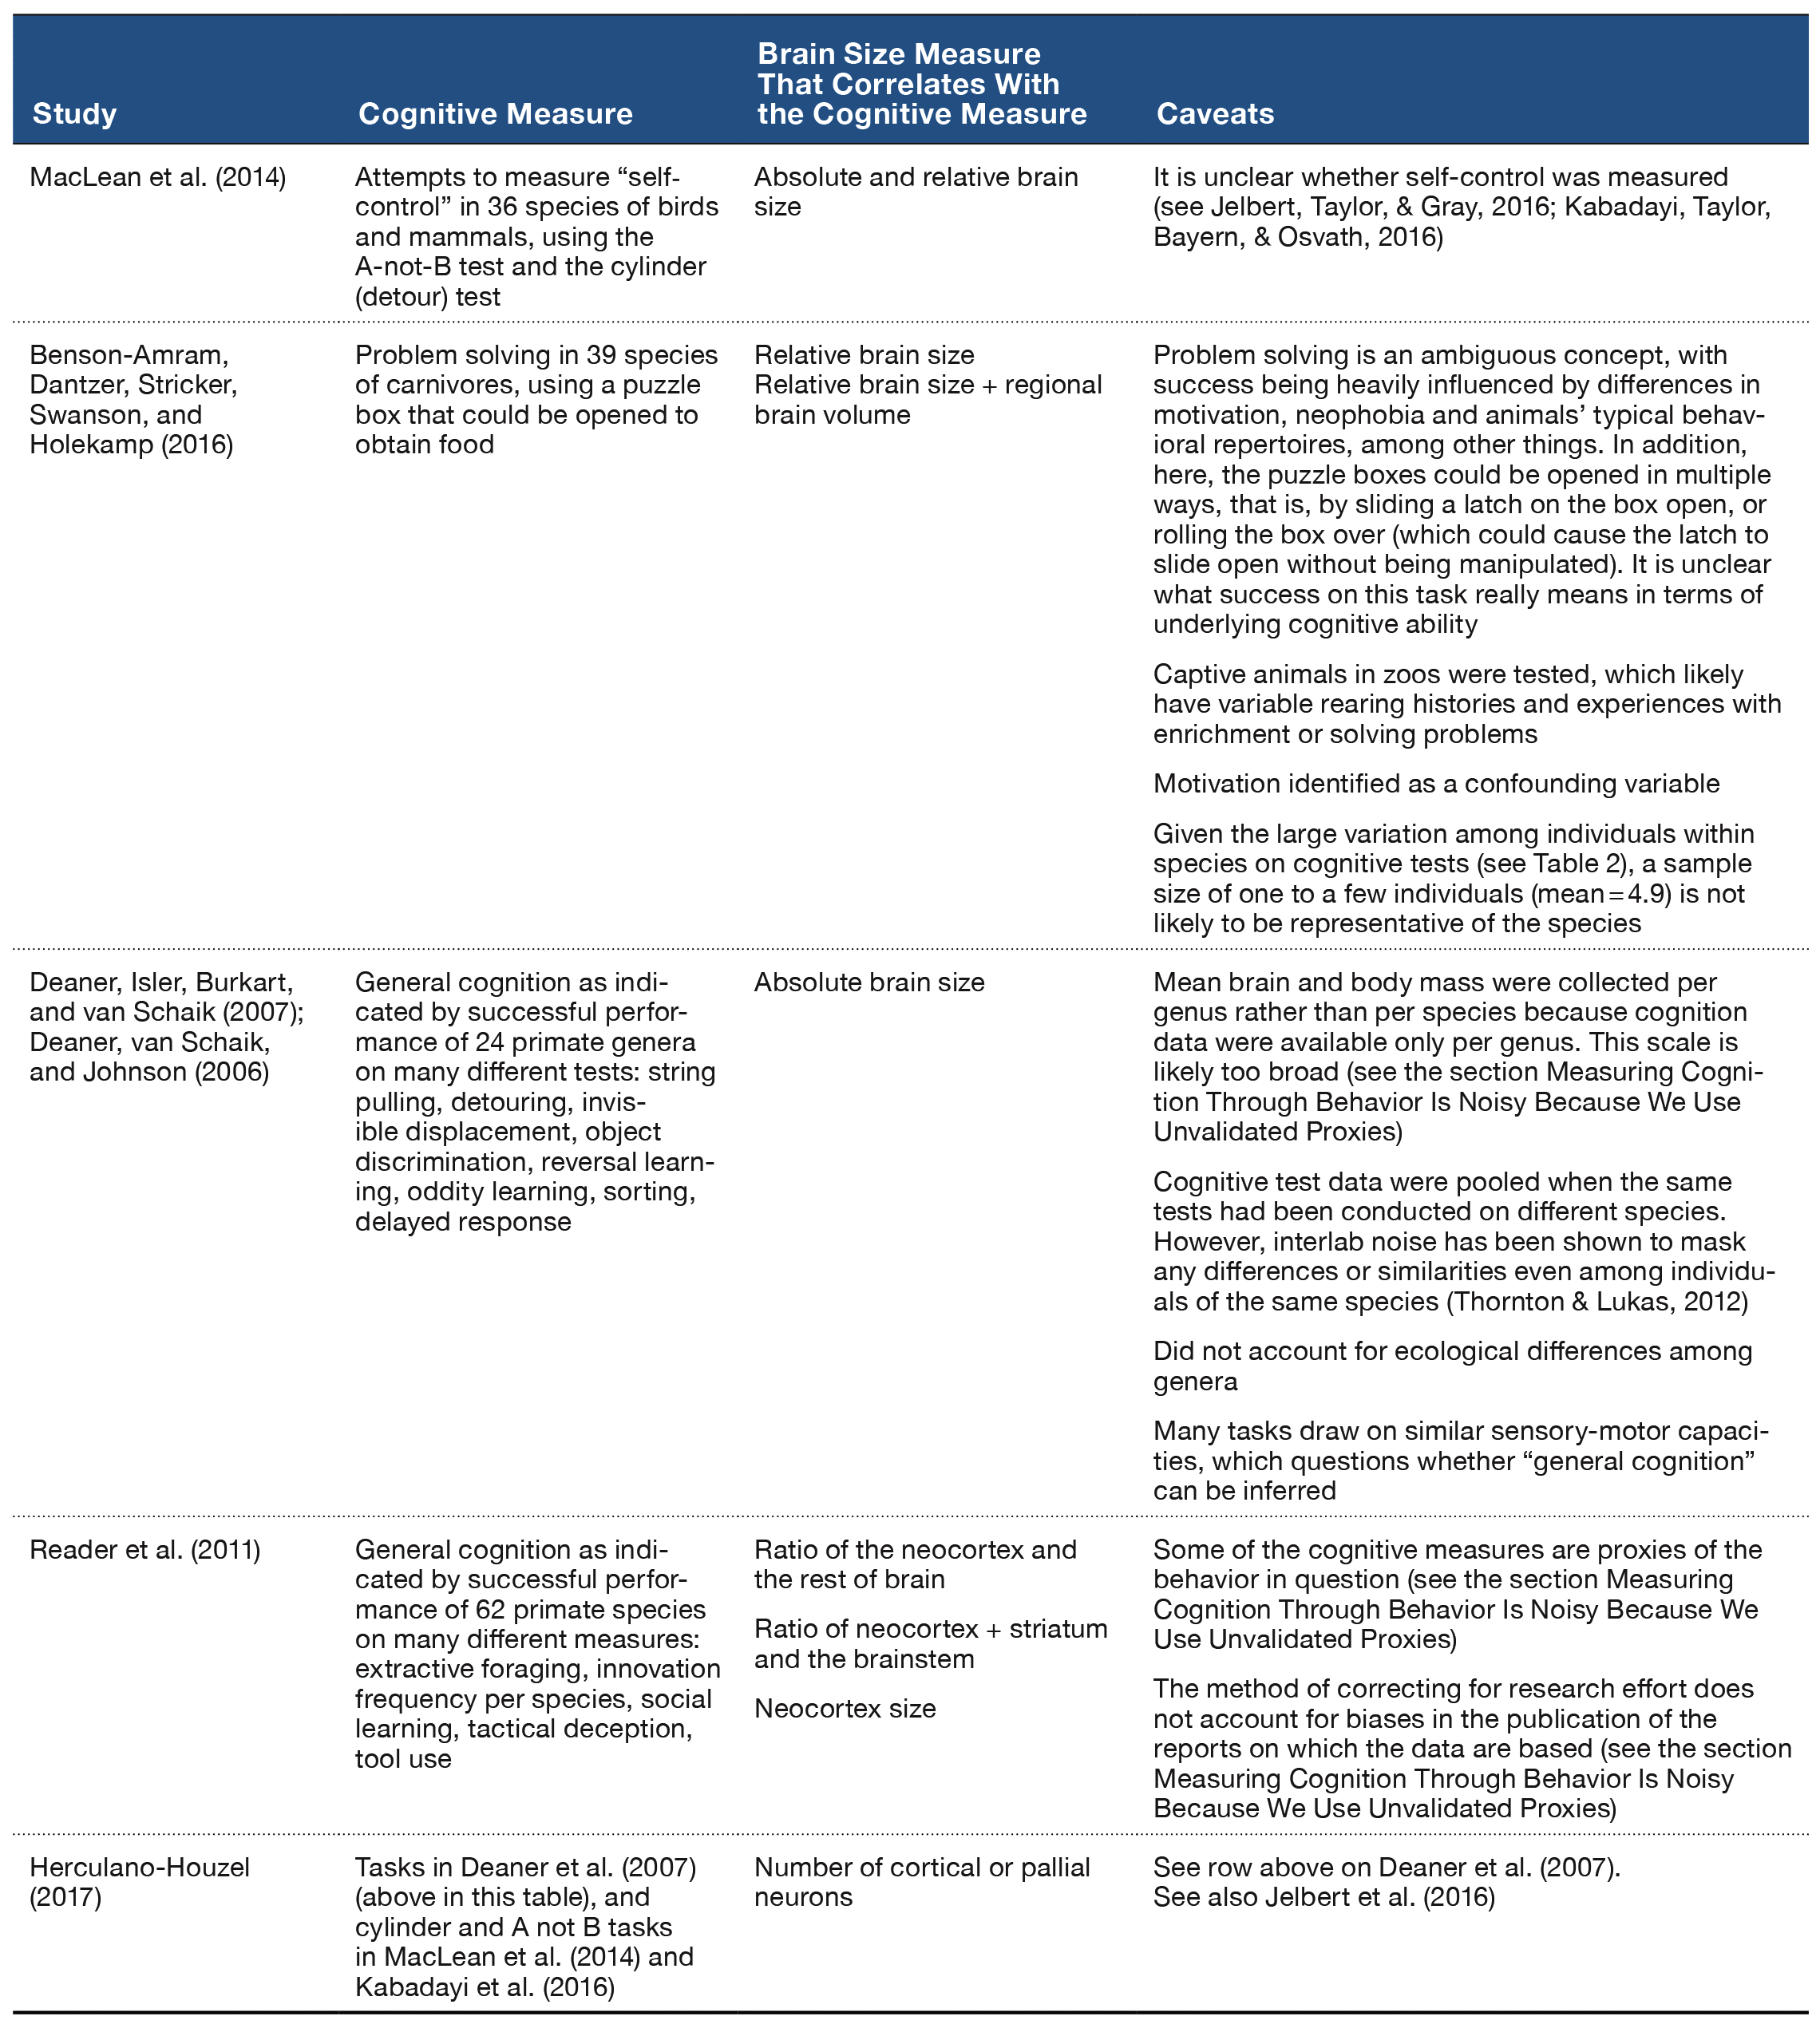 Table 1. Examples of cross-species comparisons that link cognition and brain size, and a description of the caveats about the ability to draw inferences due to the limitations involved in measuring both traits.